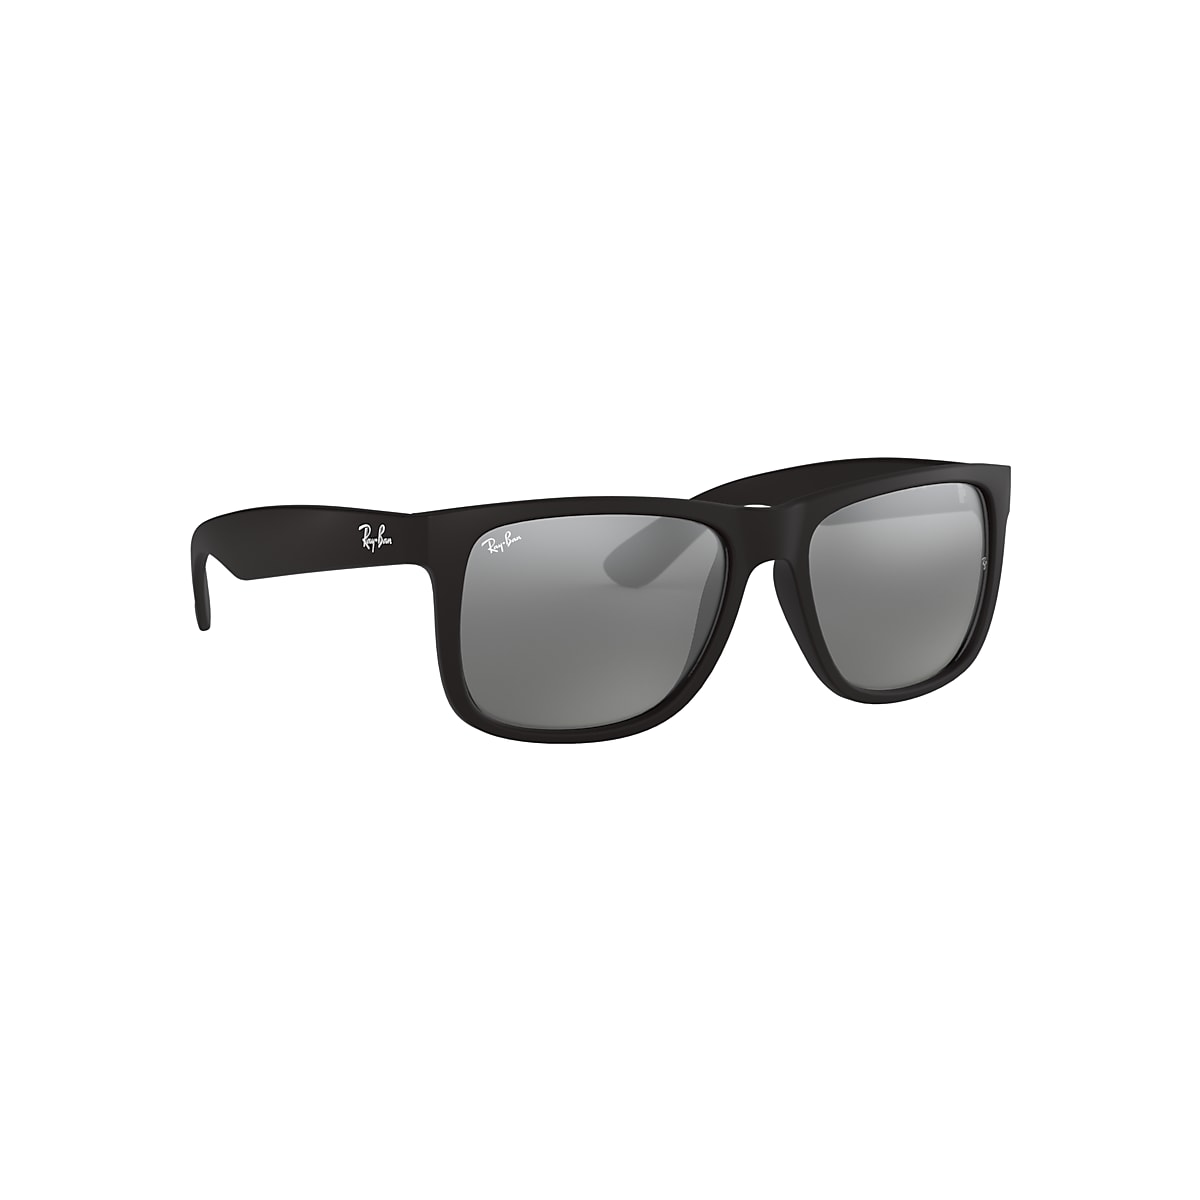 JUSTIN COLOR MIX Sunglasses in Black and Silver - RB4165F